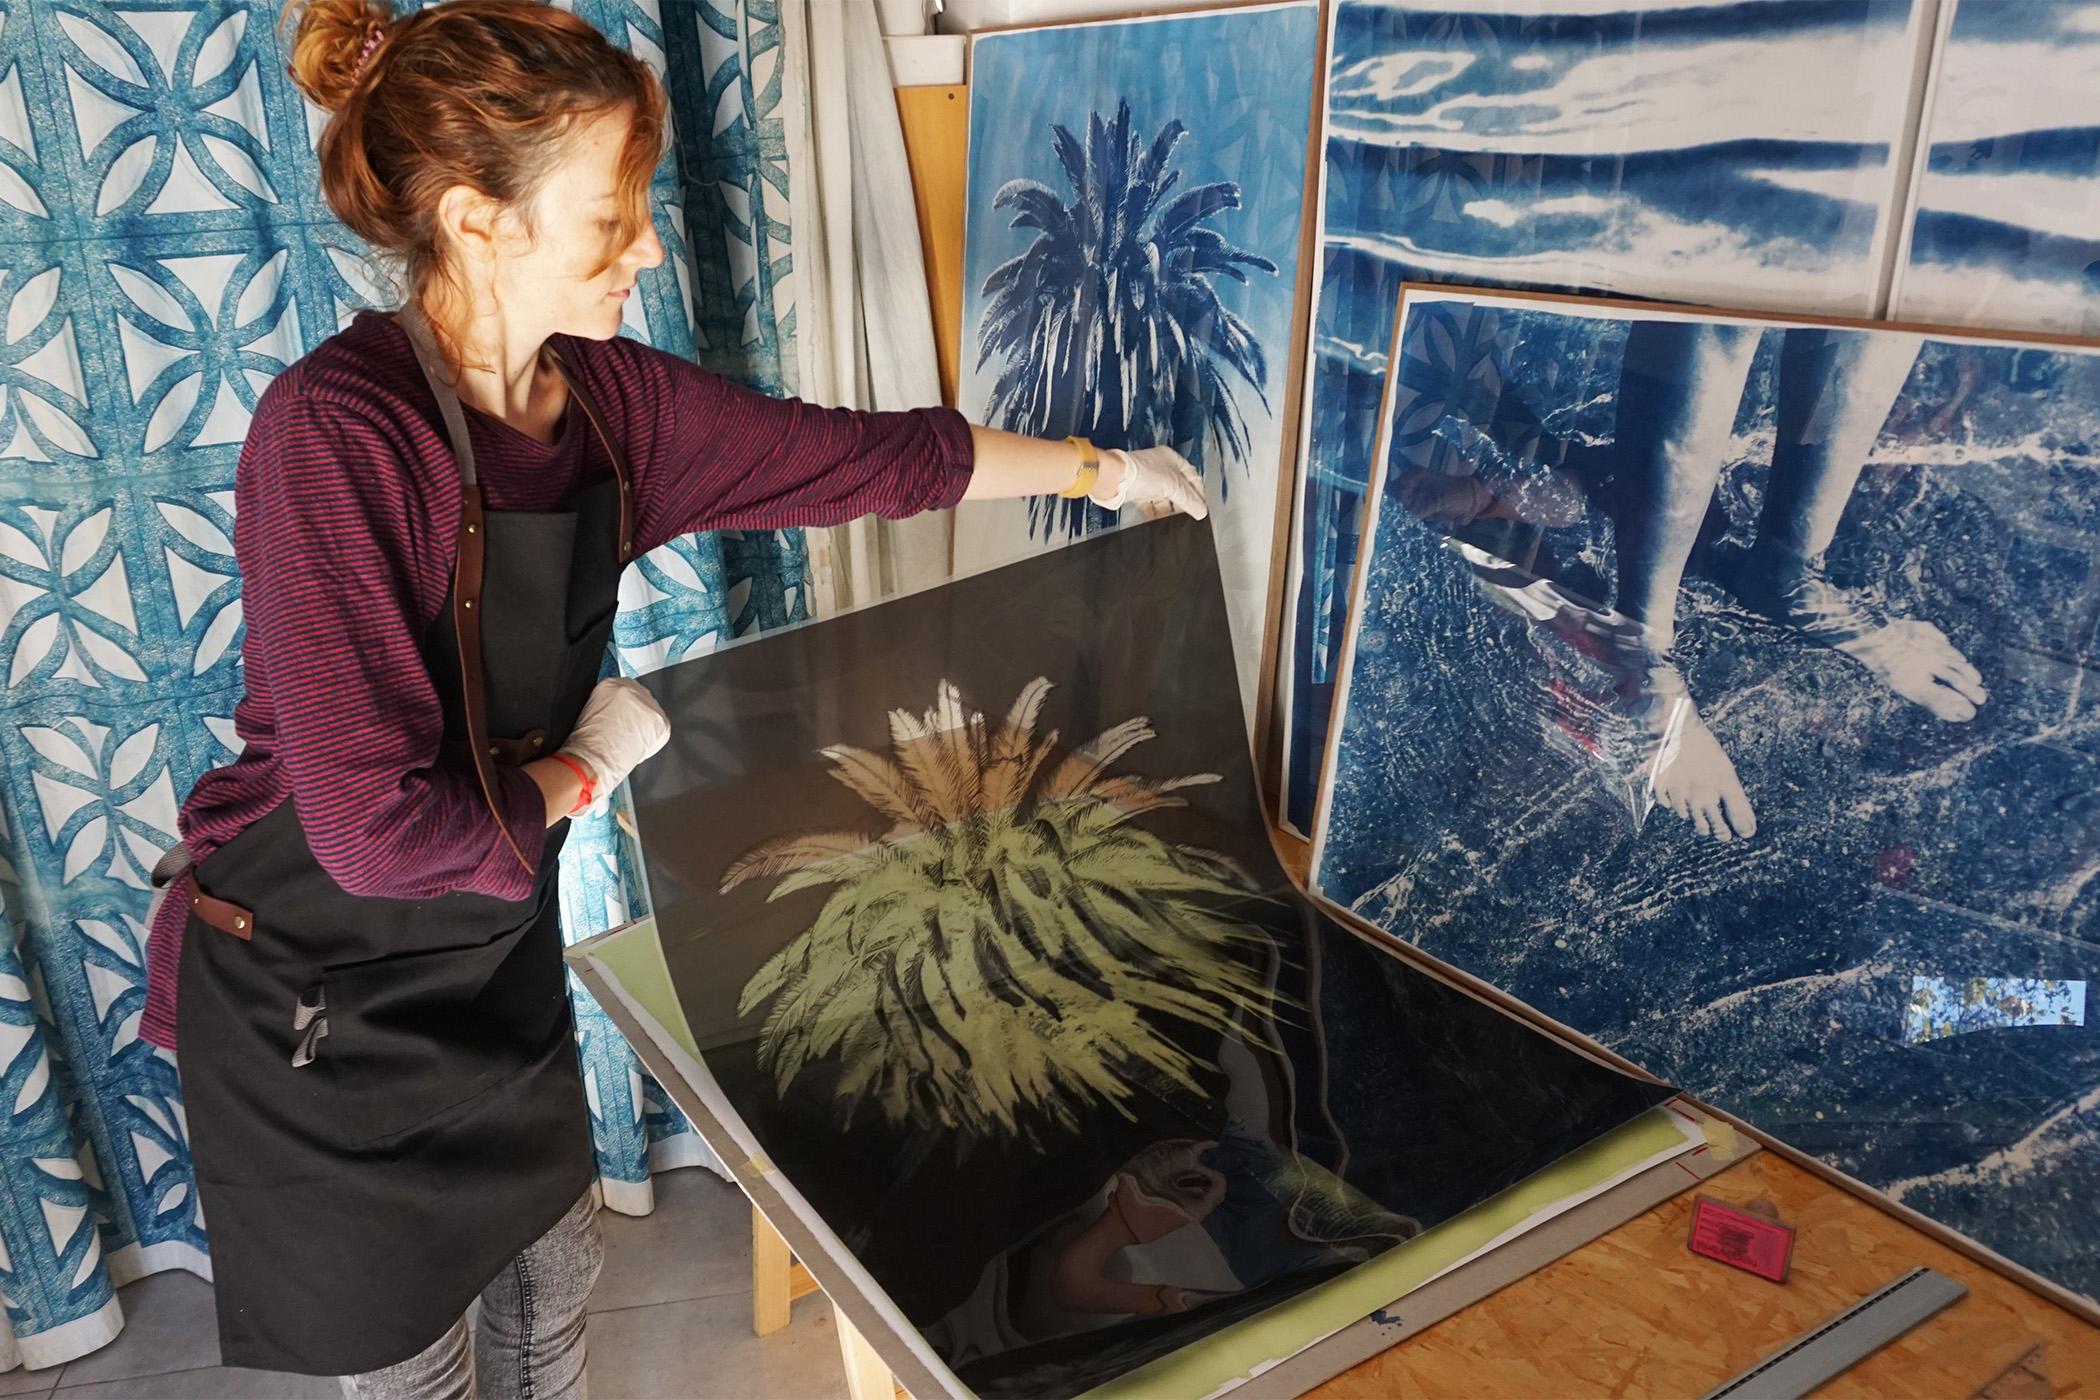 This is an exclusive handprinted limited edition cyanotype.

Details:
+ Title: Flower Kaleidoscope 
+ Year: 2022
+ Edition Size: 100
+ Stamped and Certificate of Authenticity provided
+ Measurements : 70x100 cm (28x 40 in.), a standard frame size
+